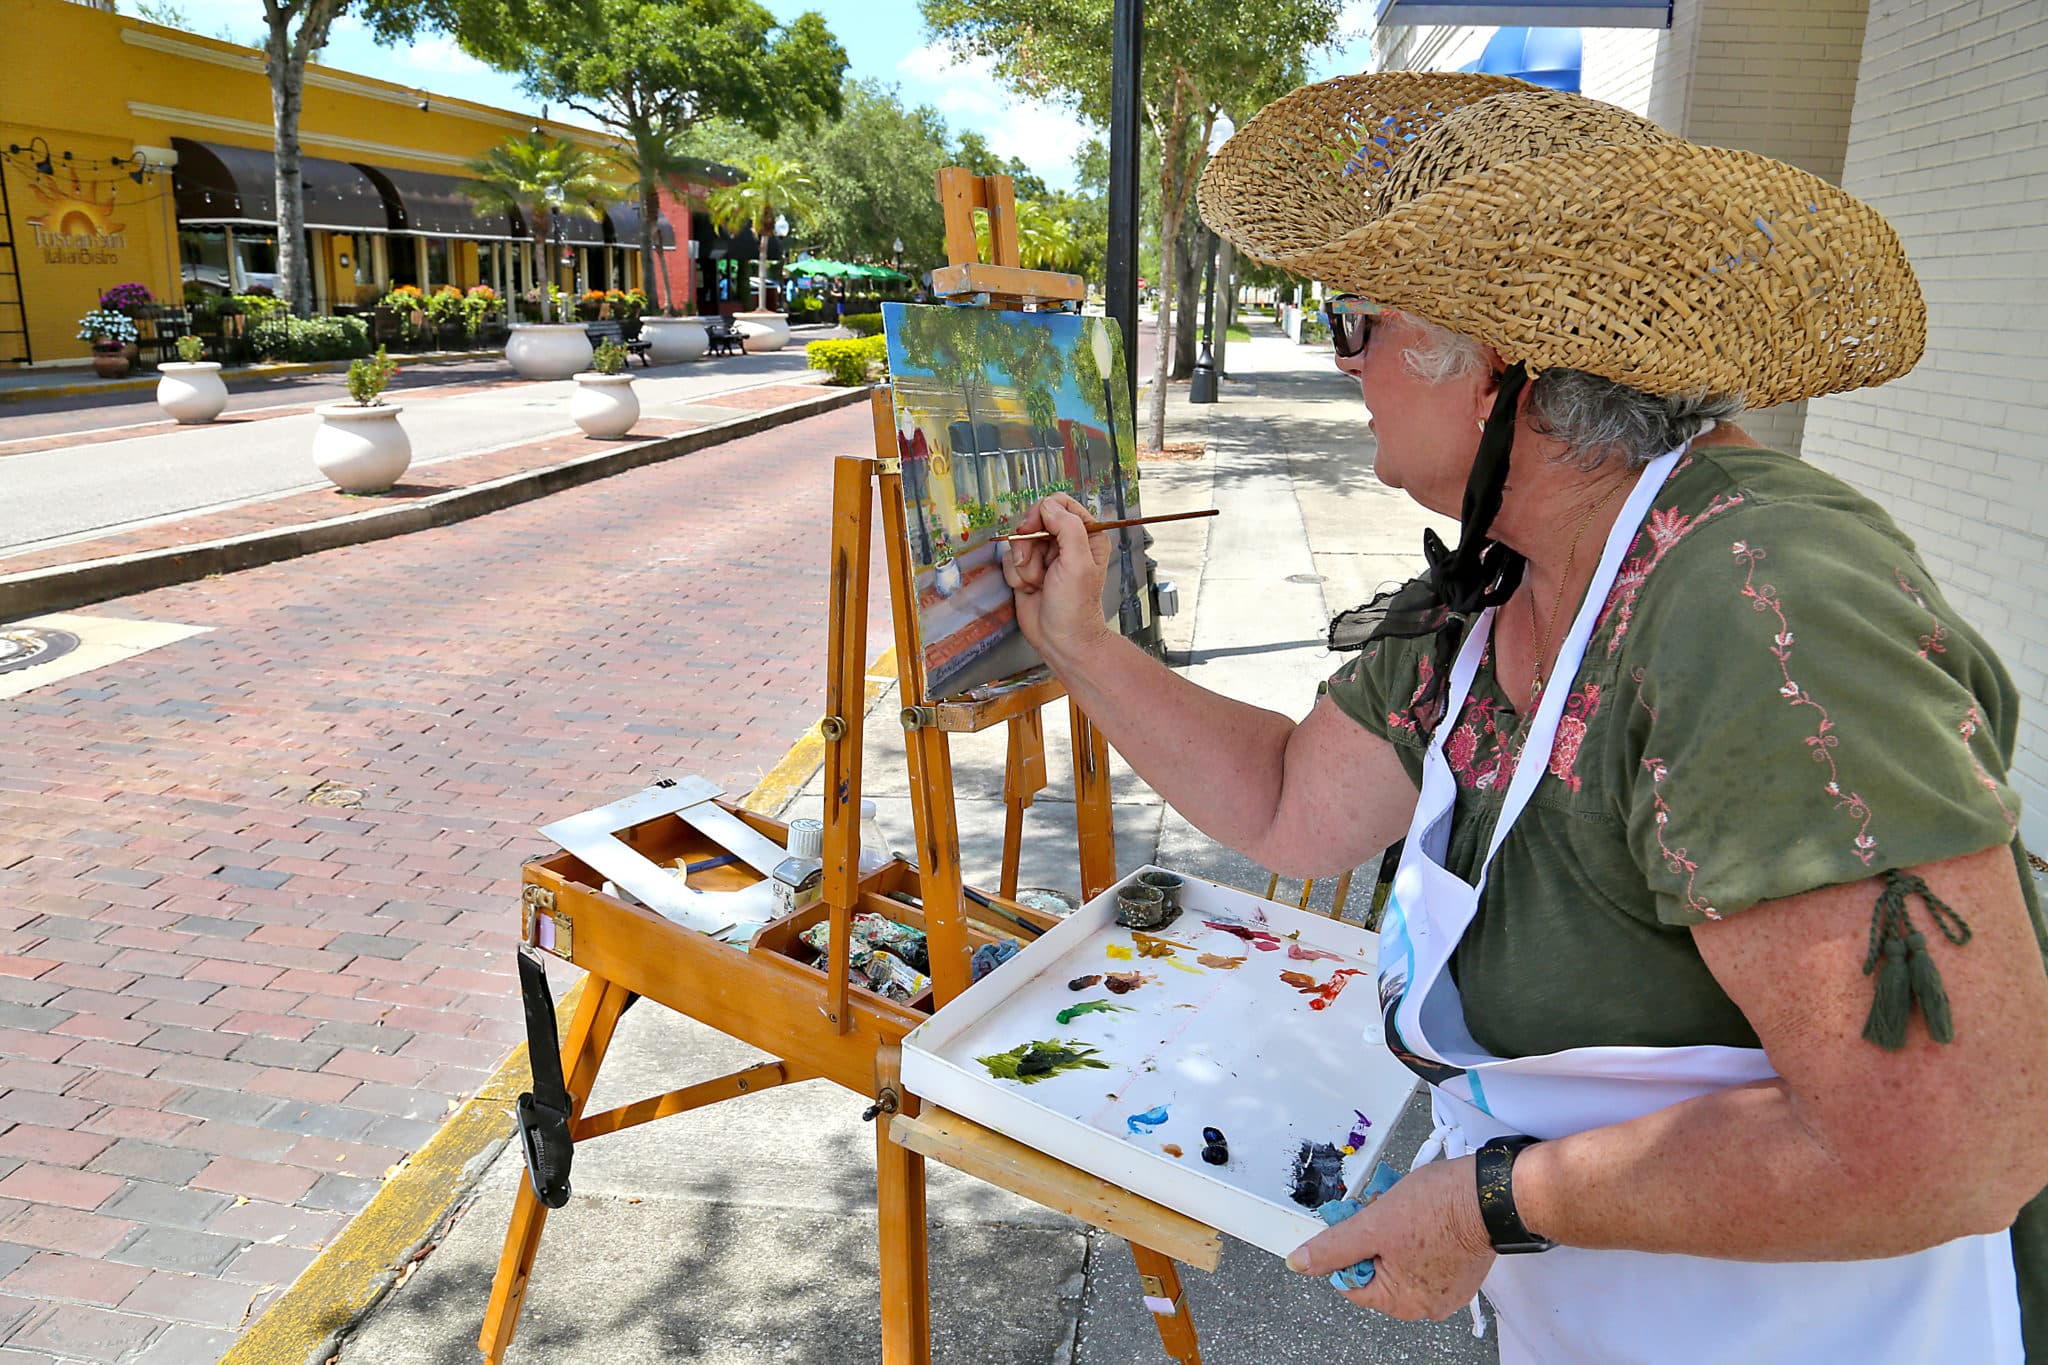 A woman on the street corner painting the row of buildings downtown